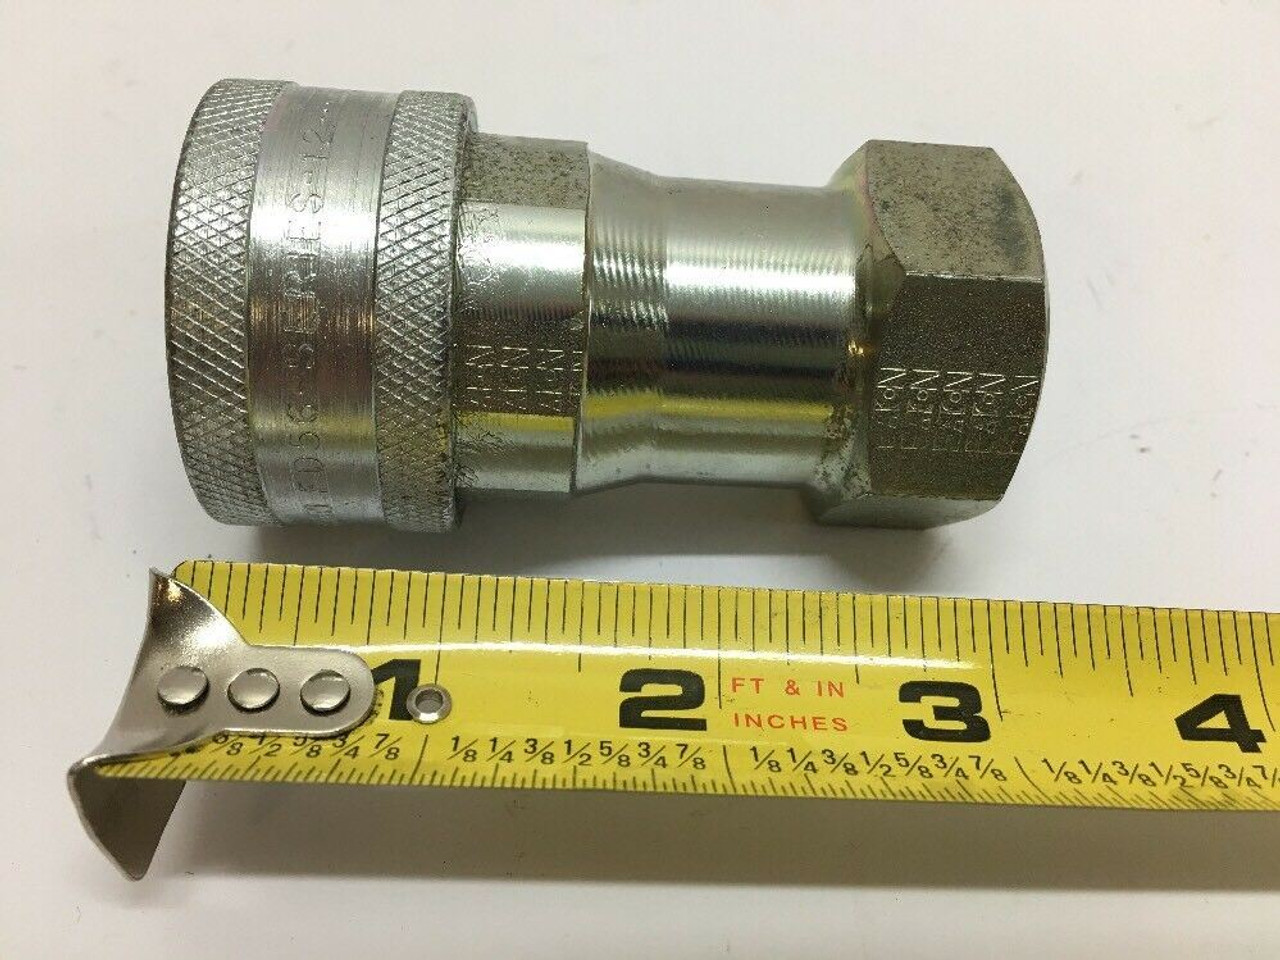 Quick Disconnect Coupling Half 10503865 General Dynamics Steel